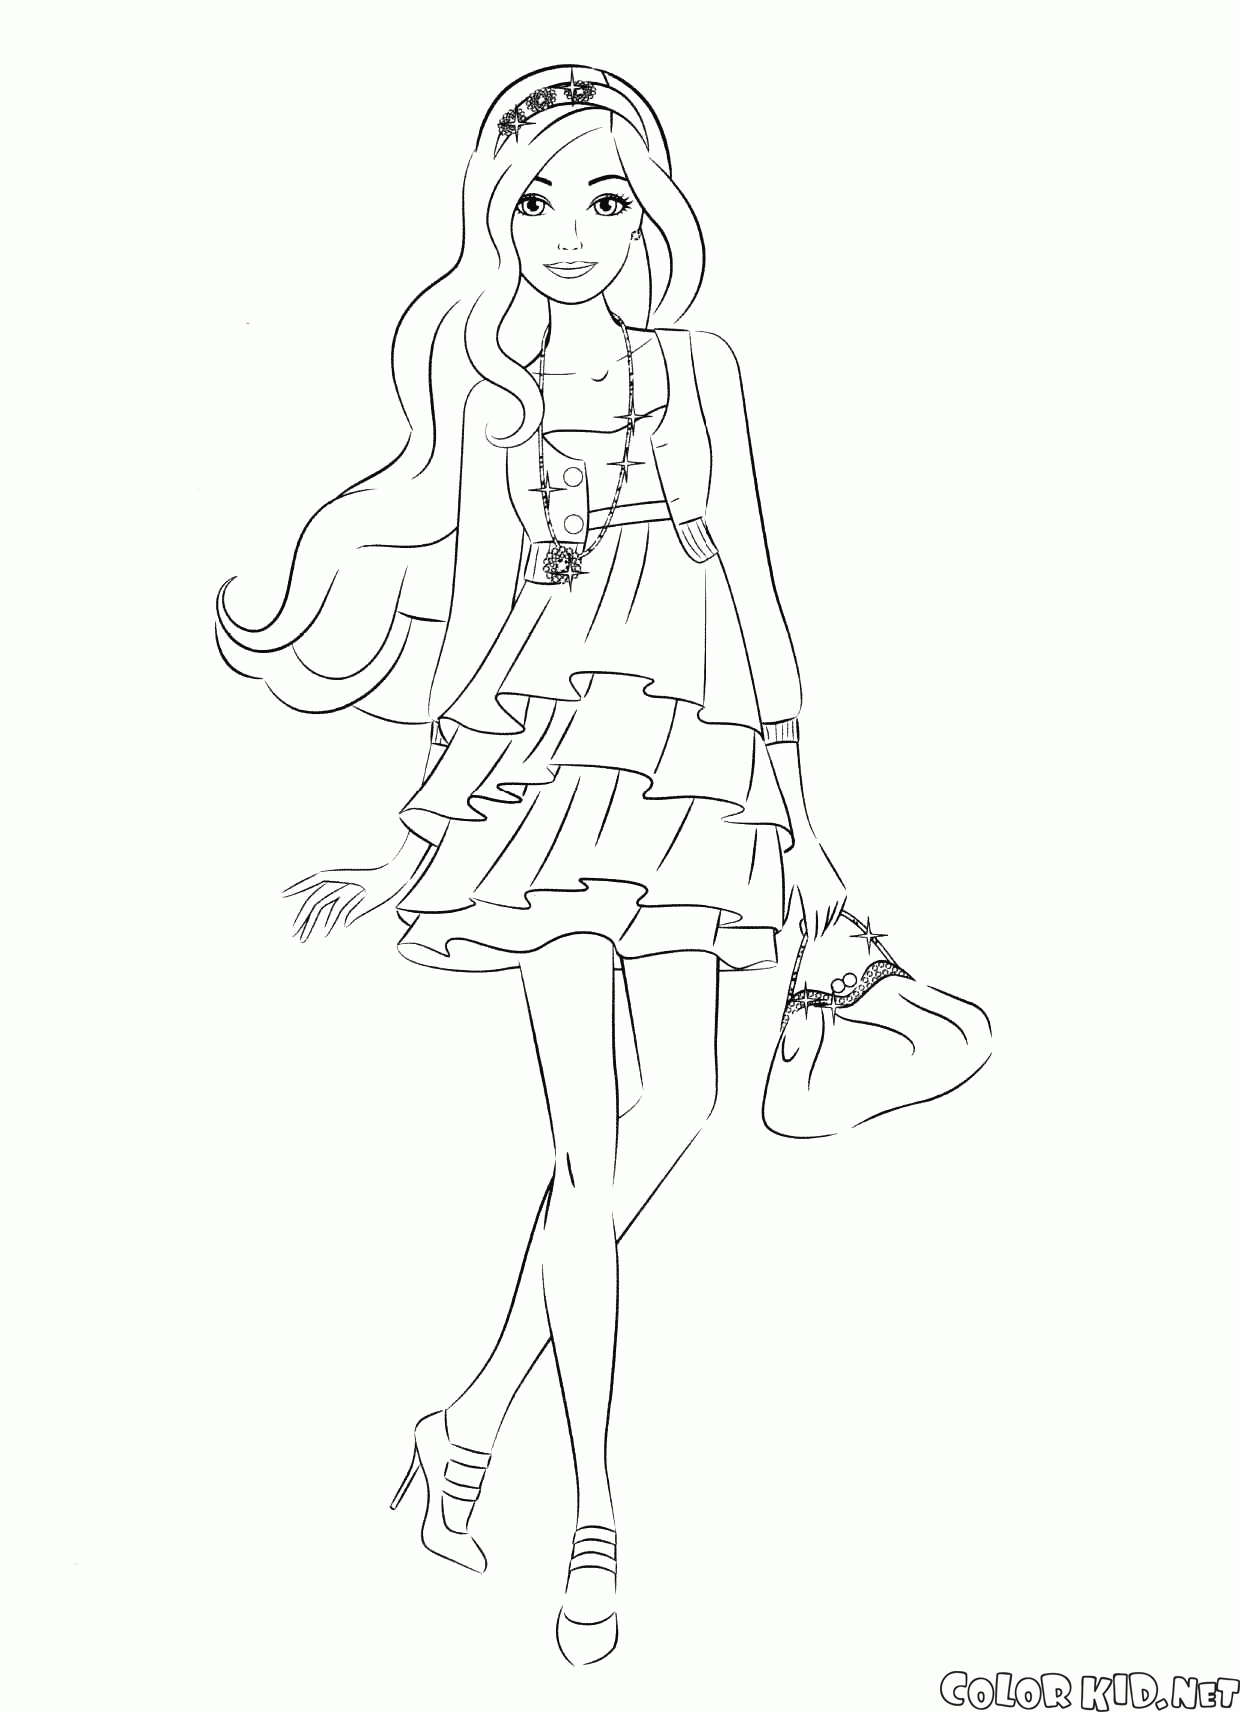 Coloring page - Barbie in a short dress